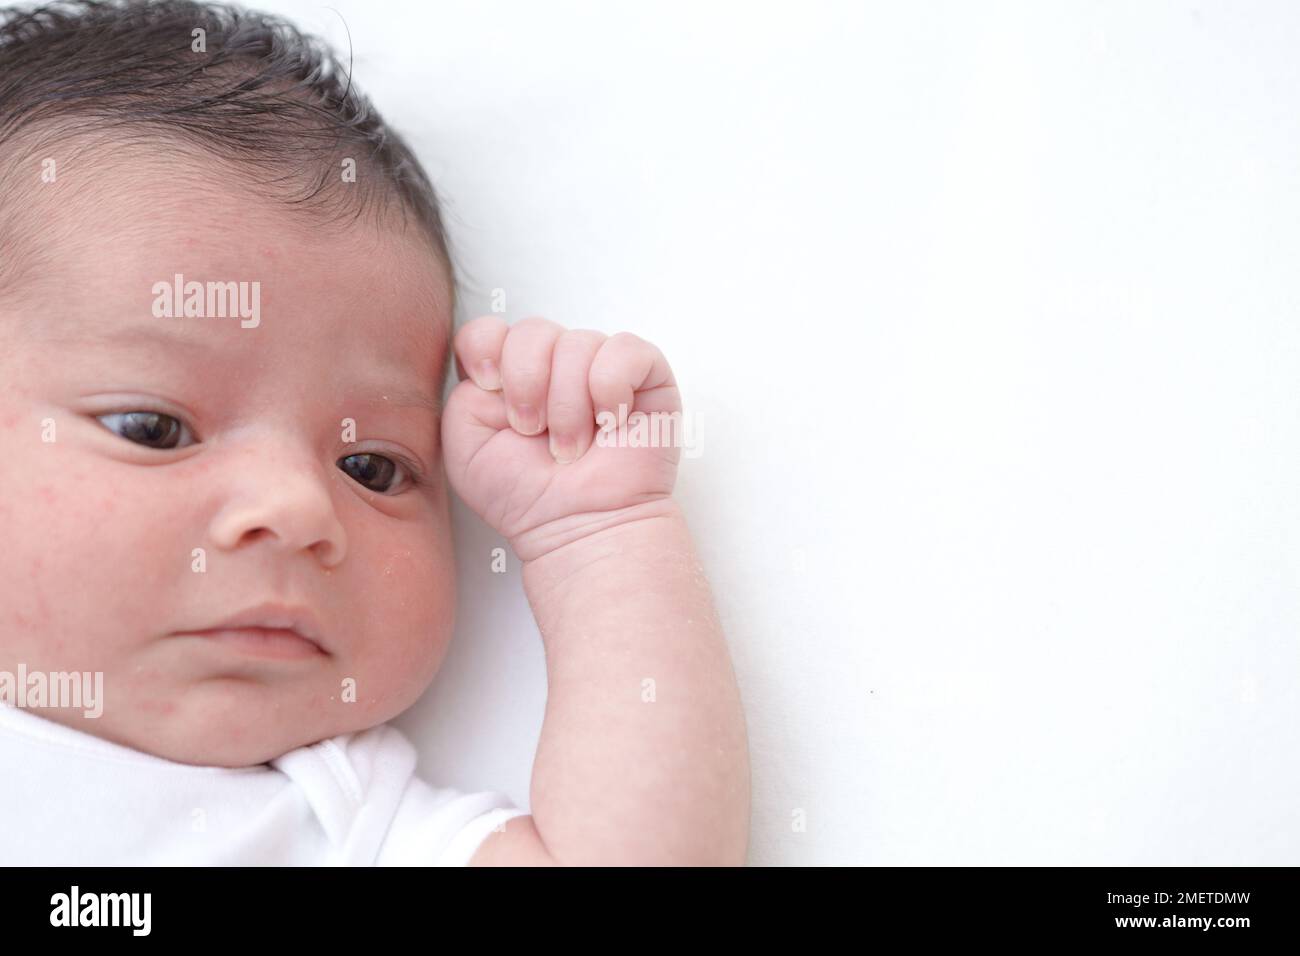 Baby girl's face and hand, making fist Stock Photo